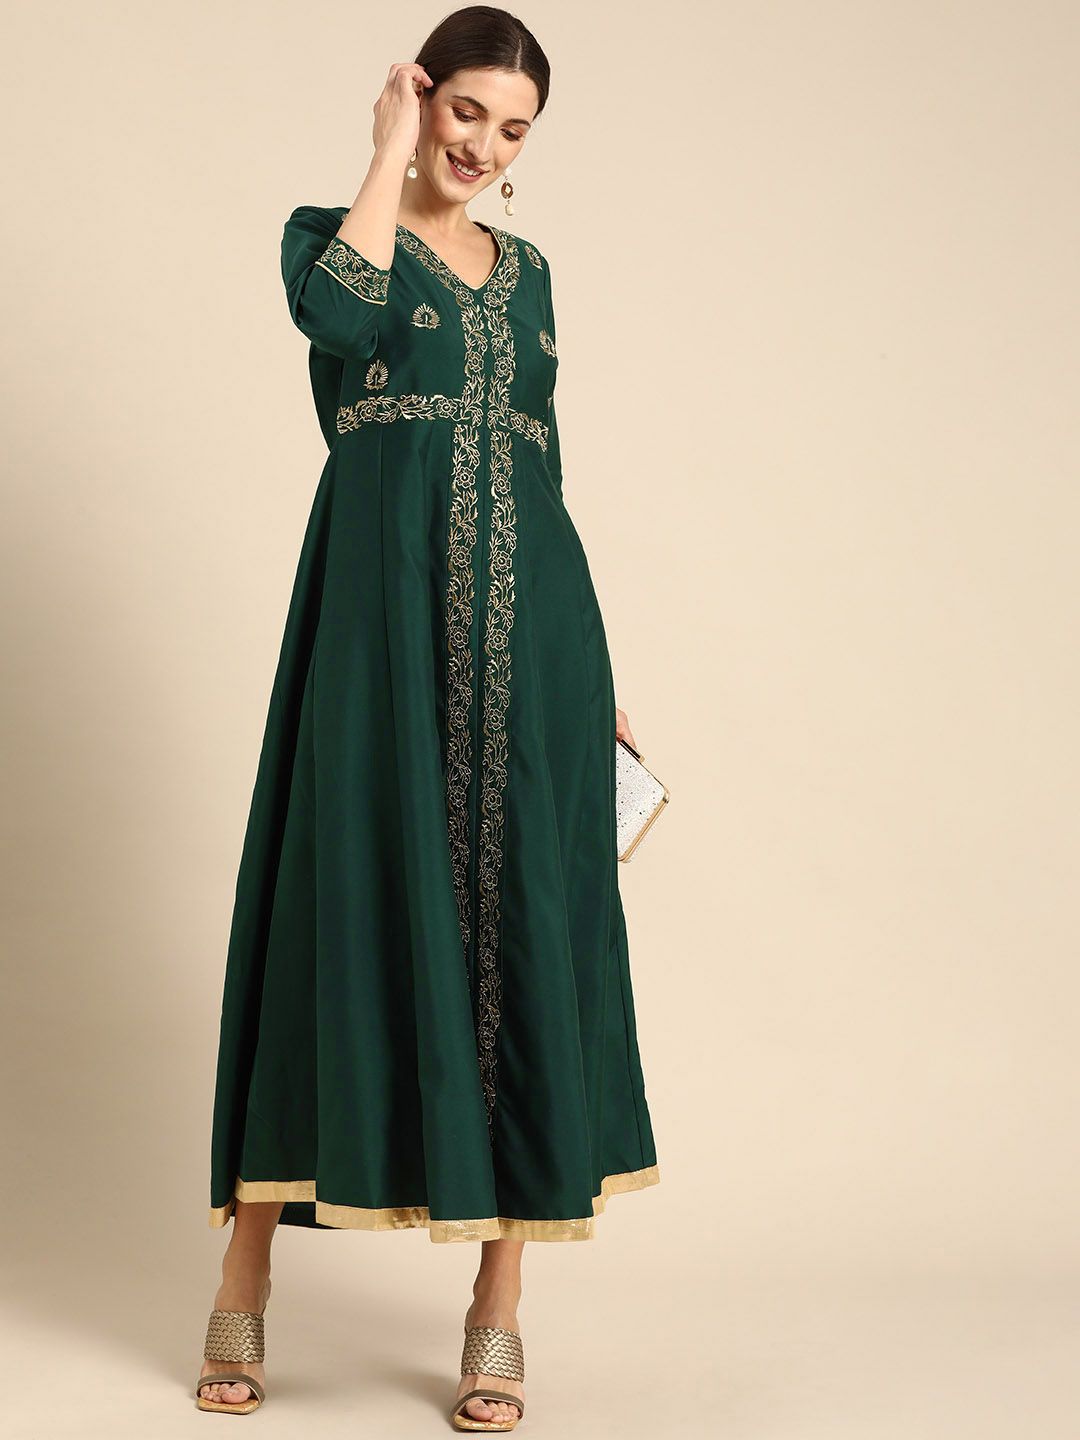 all about you Green Ethnic Motifs Embroidered Ethnic Maxi Dress Price in India